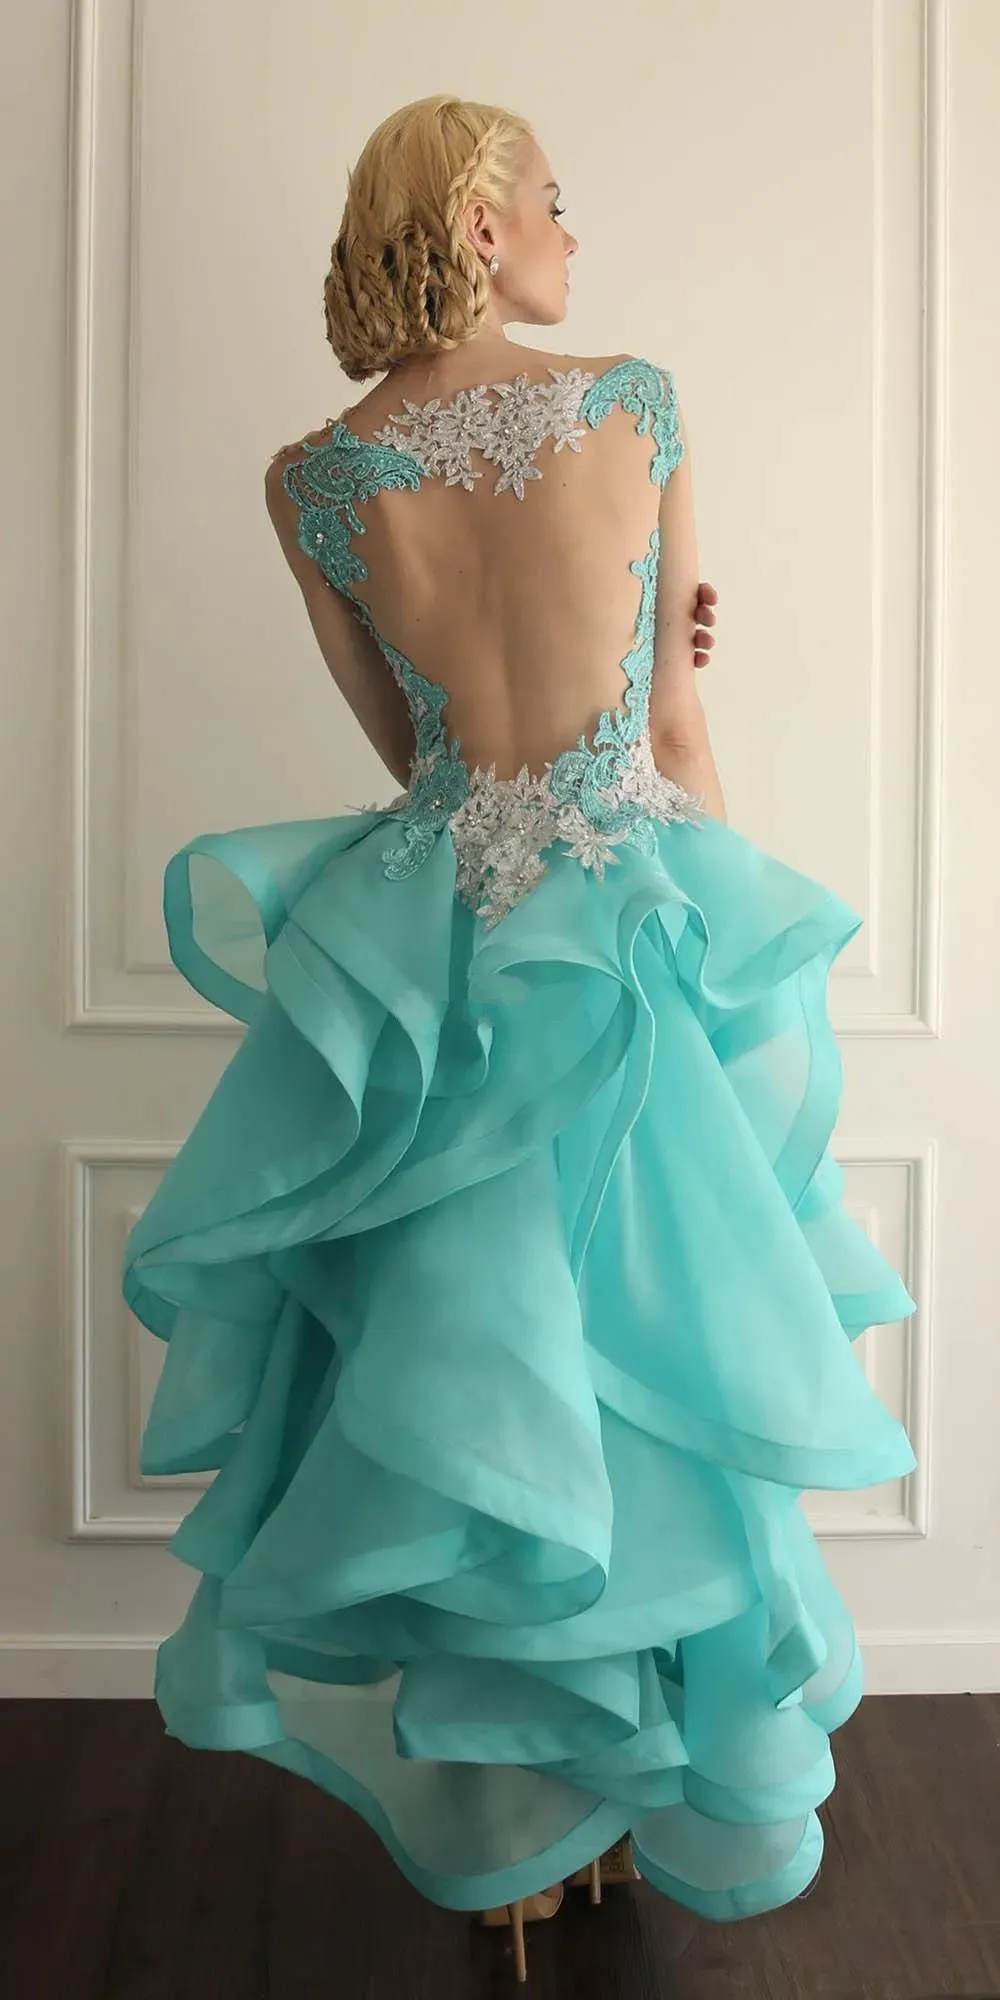 Jewel Sheer Neckline High Low Short Homecoming Dresses Turquoise Prom Gowns With Lace Applique Backless Ruffles Cocktail Gowns Custom Made